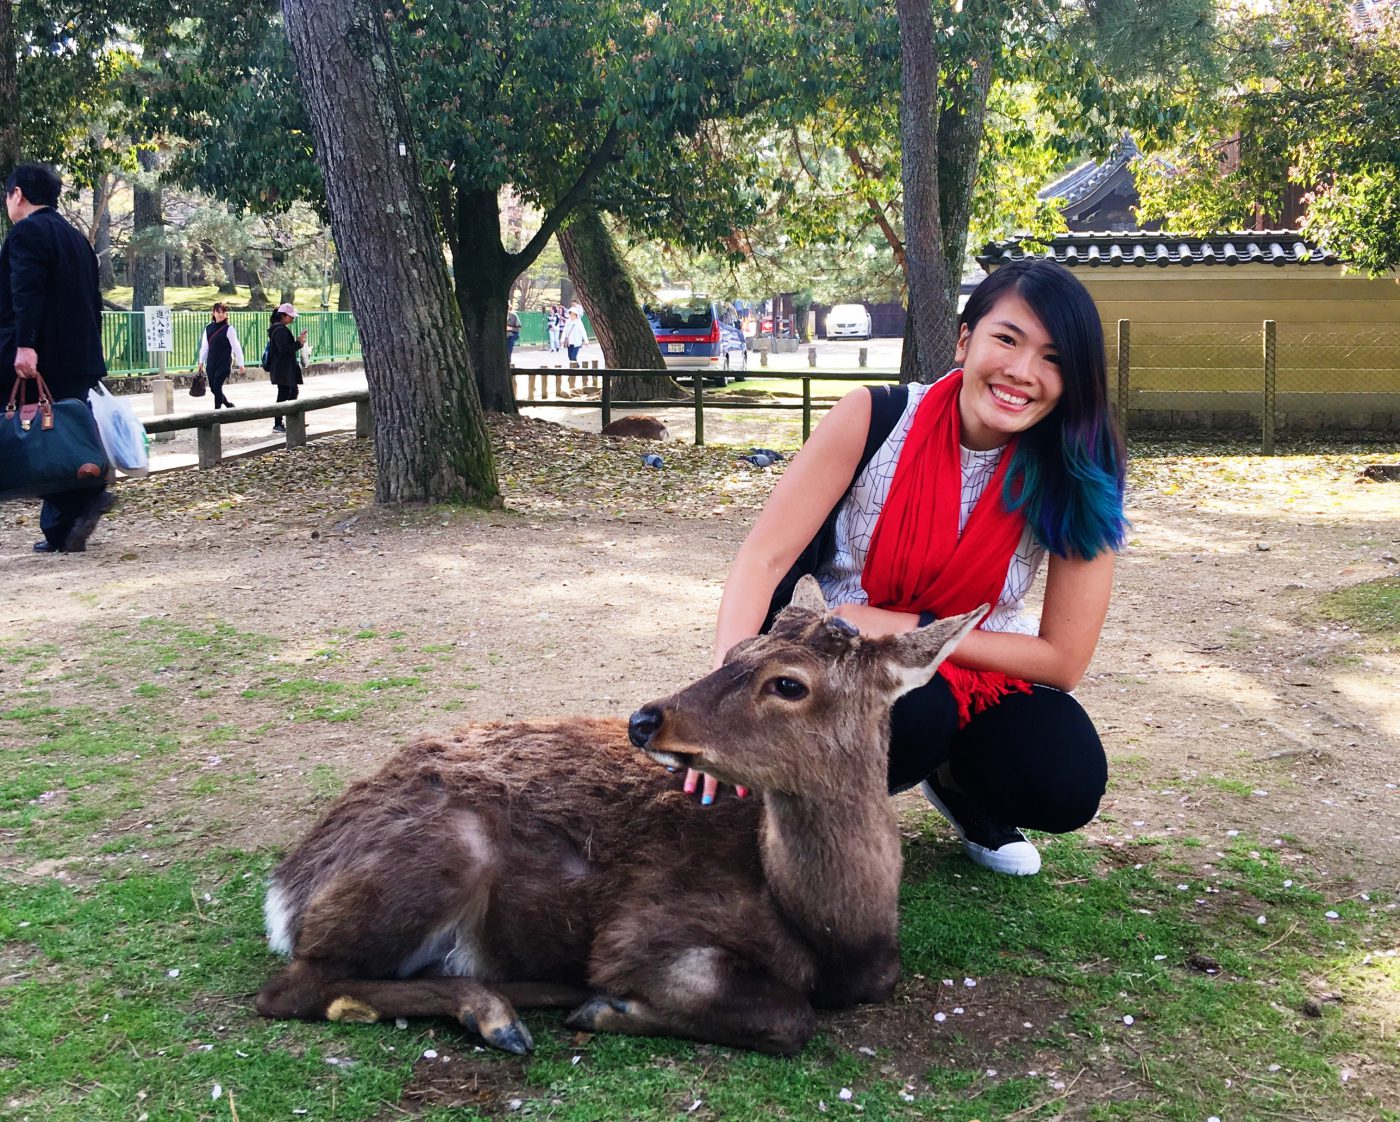 Playing with friendly deers in Nara